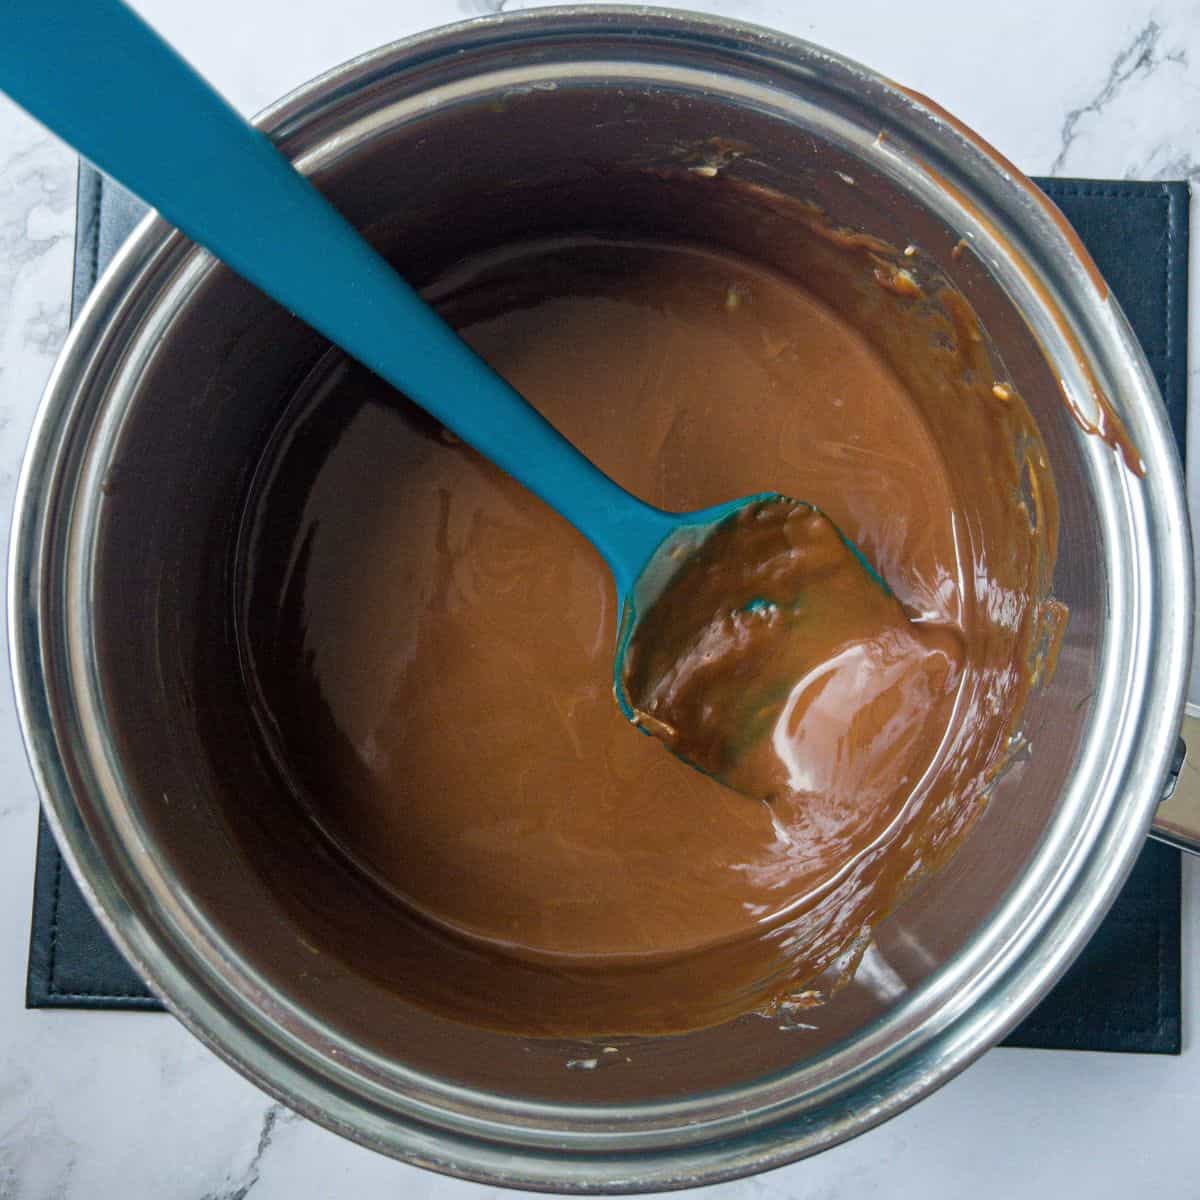 nChocolate melting in a saucepan with a blue spatula in the saucepan.